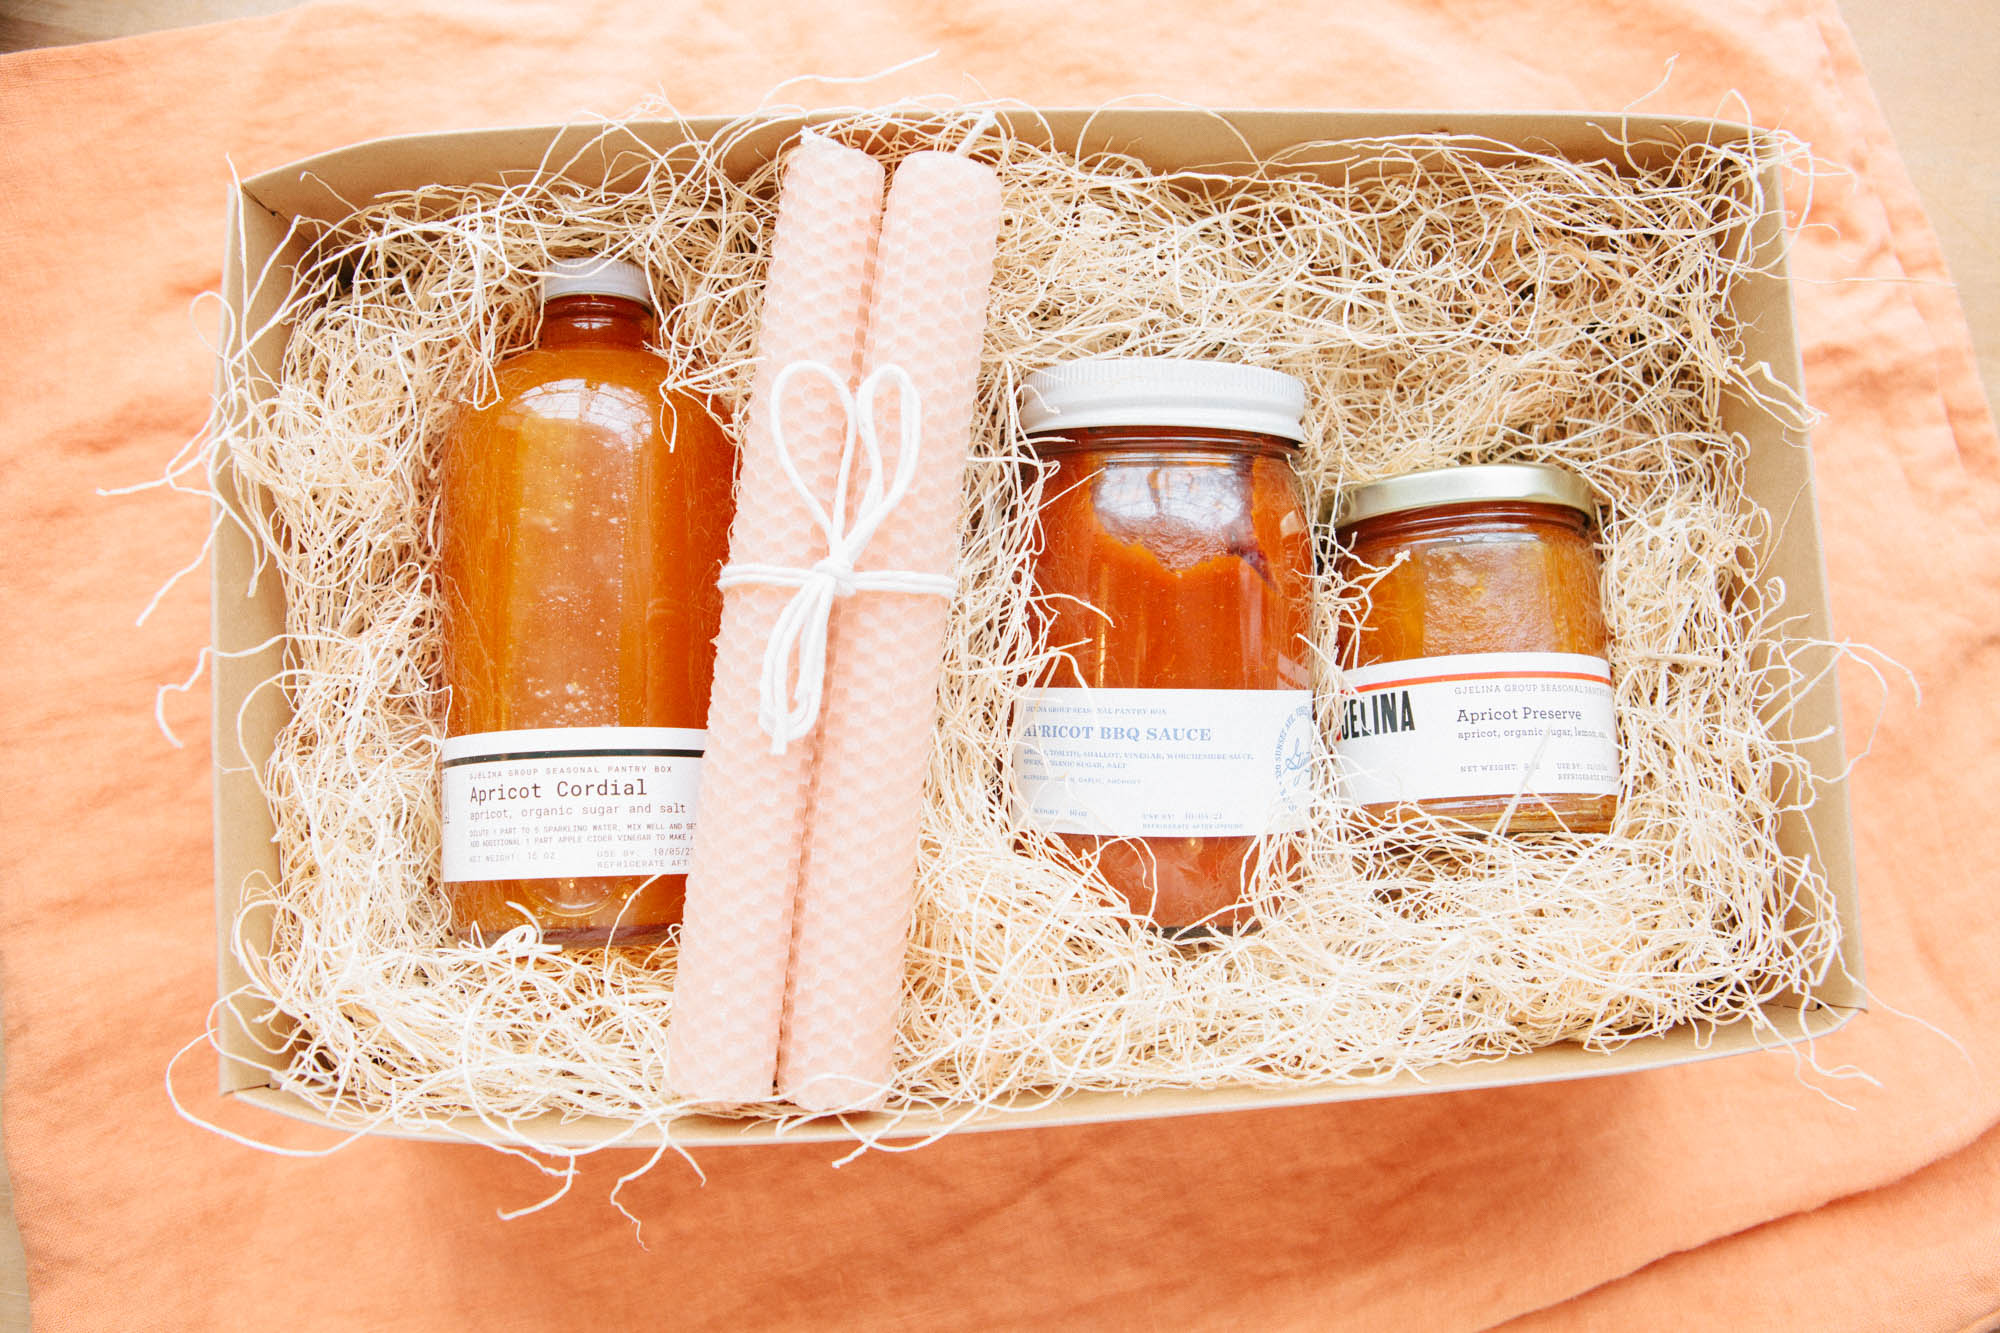 The August Apricot Box